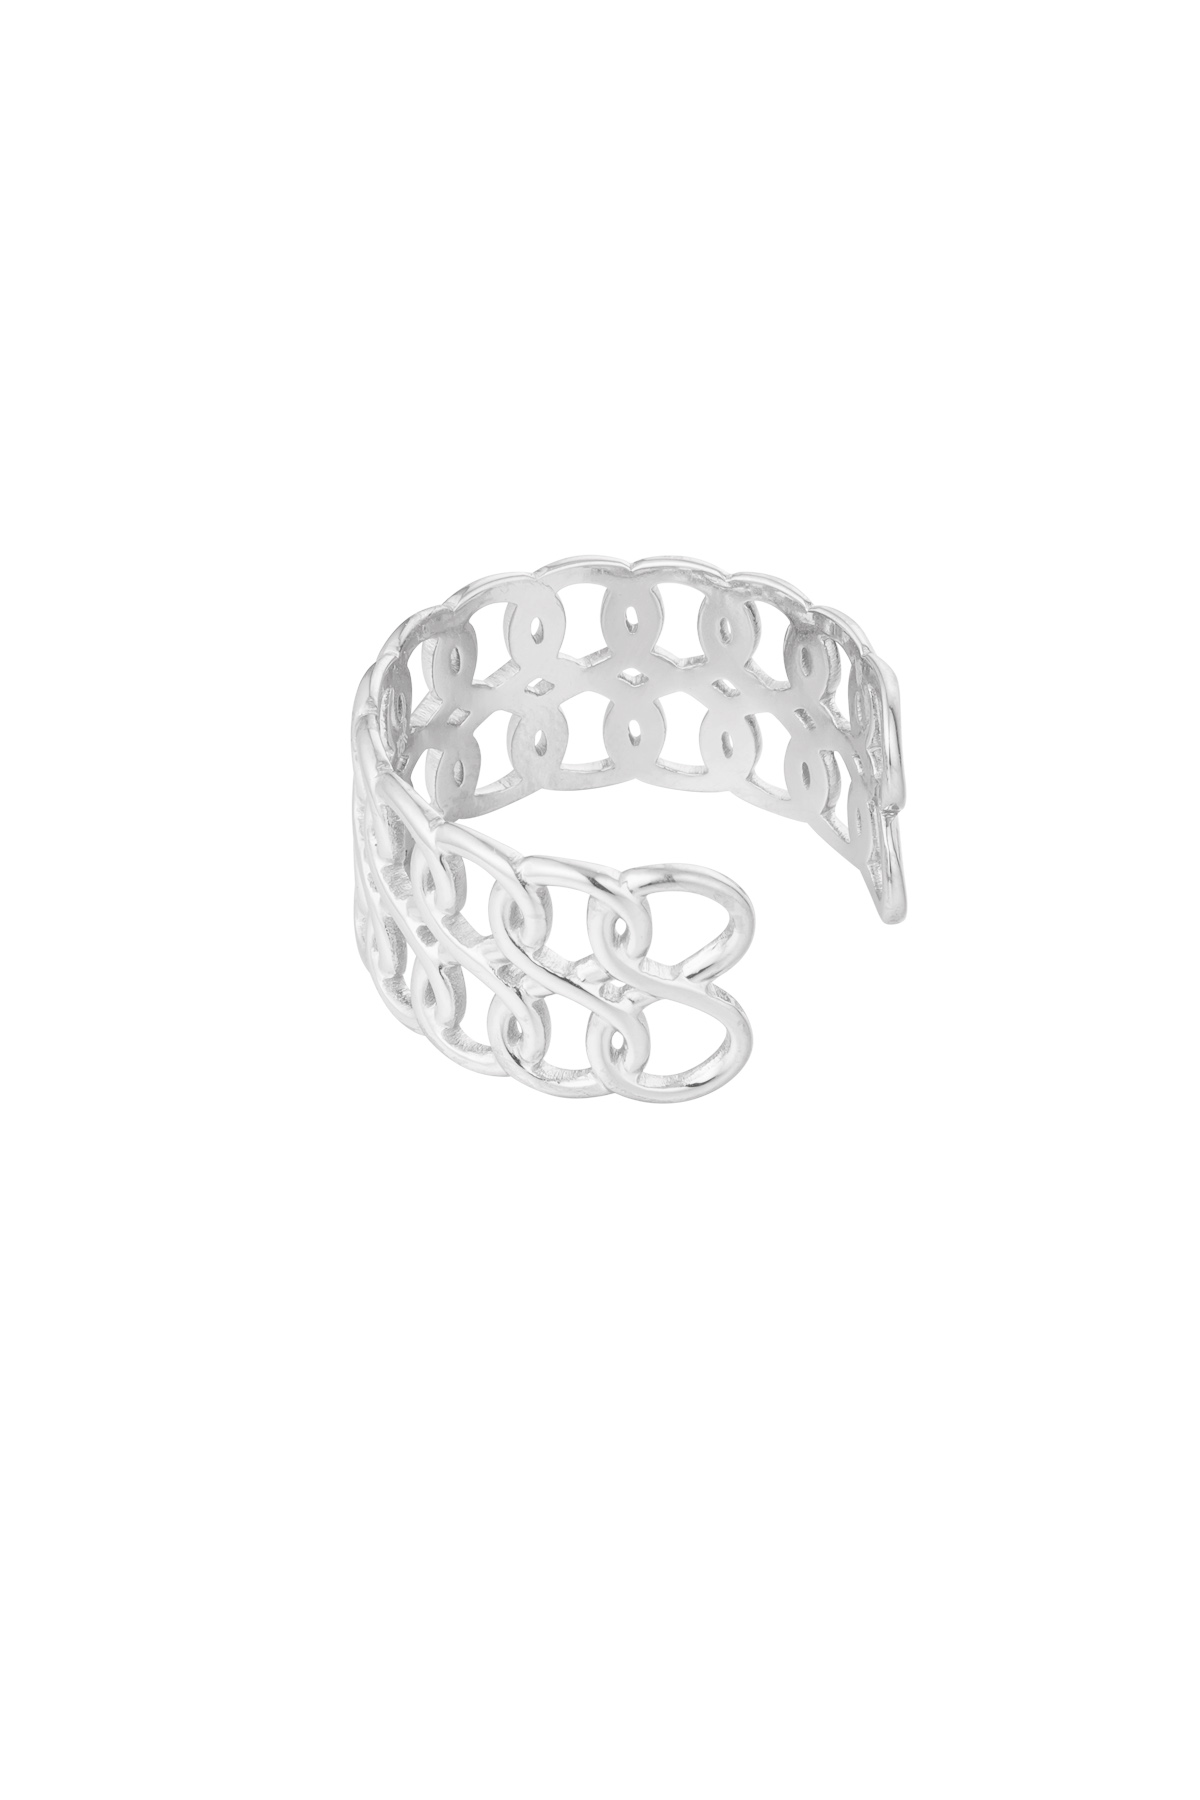 Ring special link - silver h5 Picture4